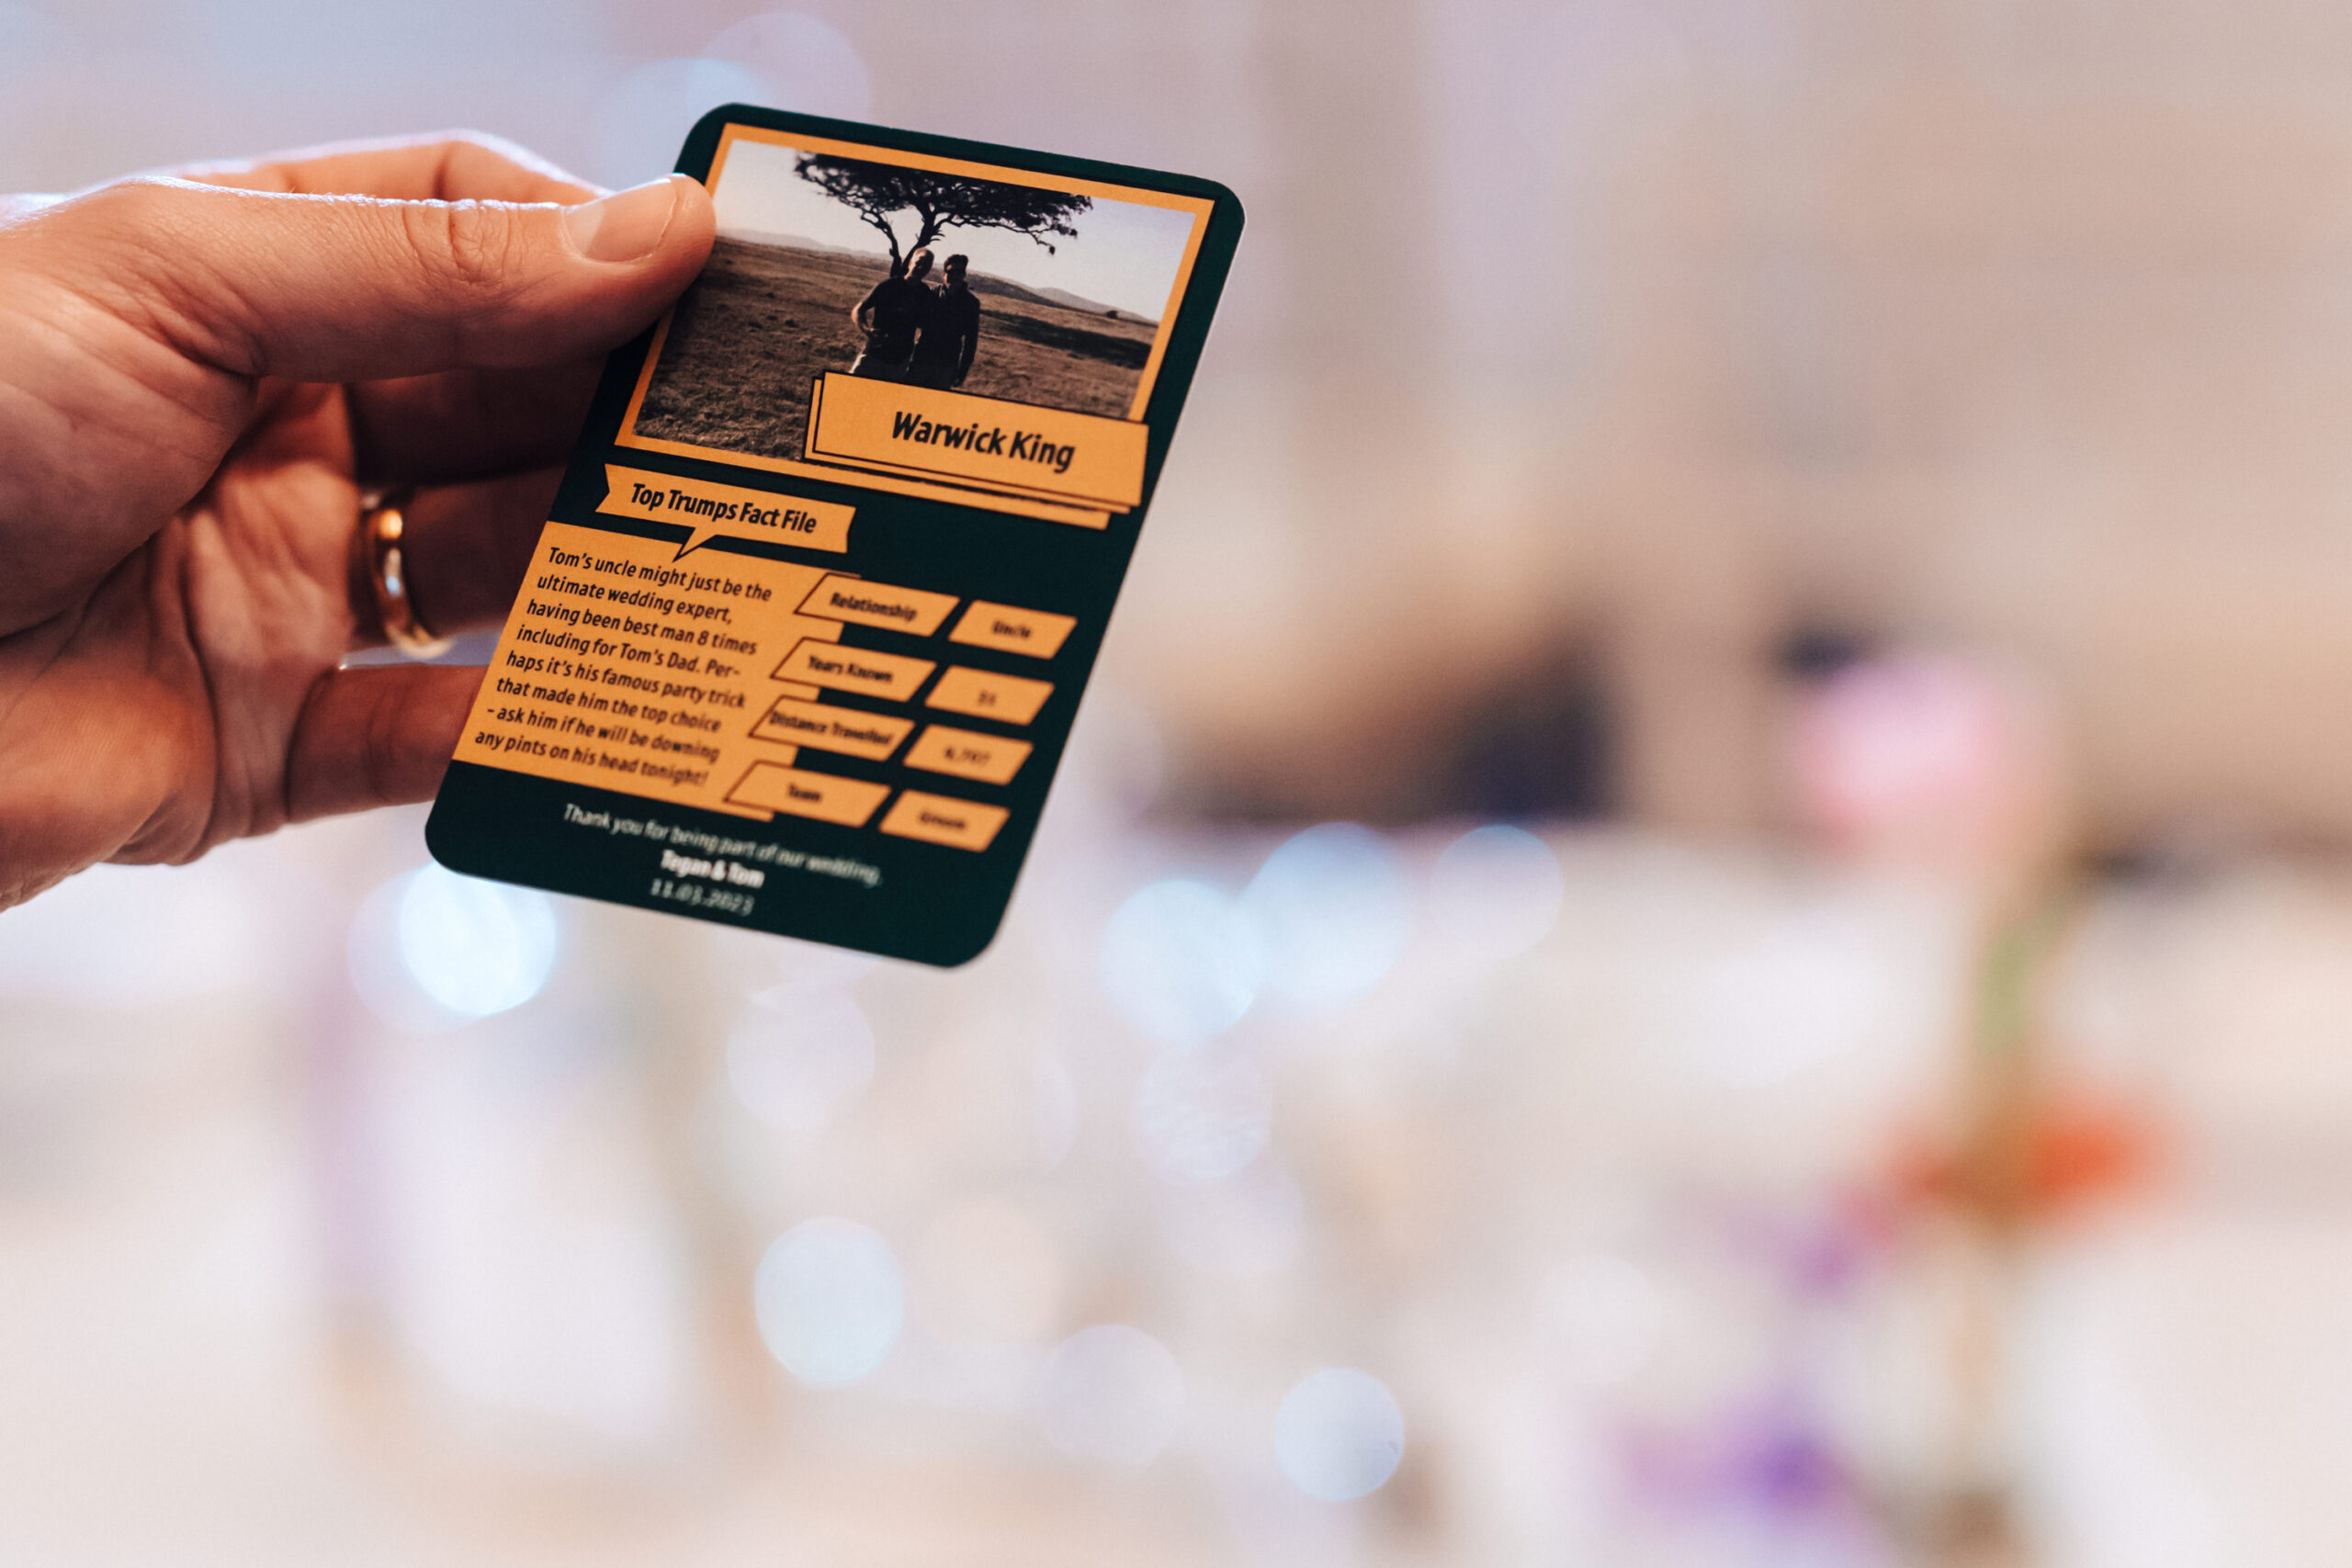 A bespoke top trumps card made for wedding guests